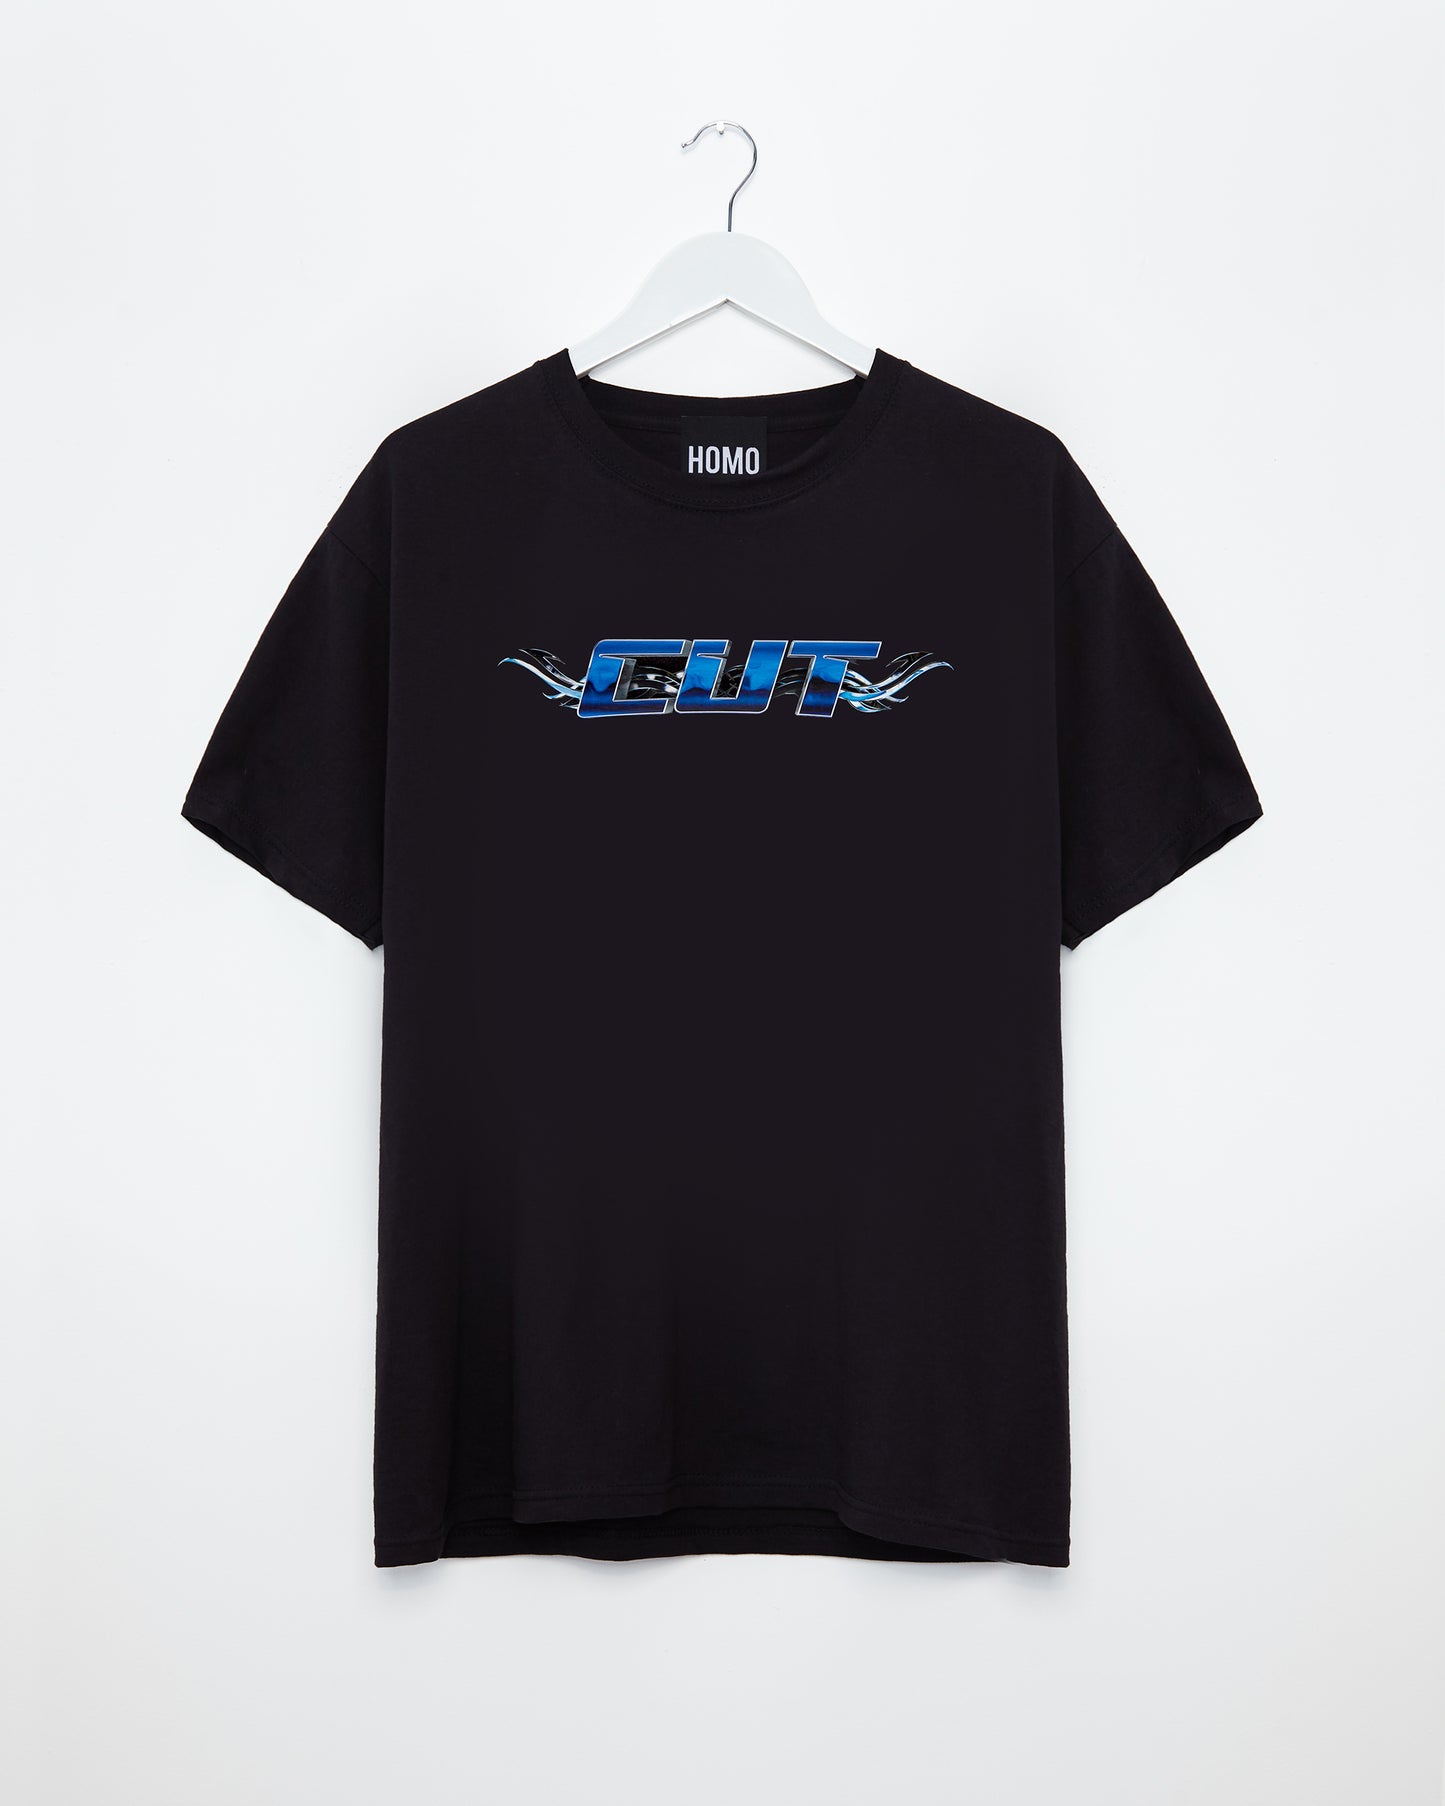 Chrome Y2K: CUT, blue and silver on black - tee.